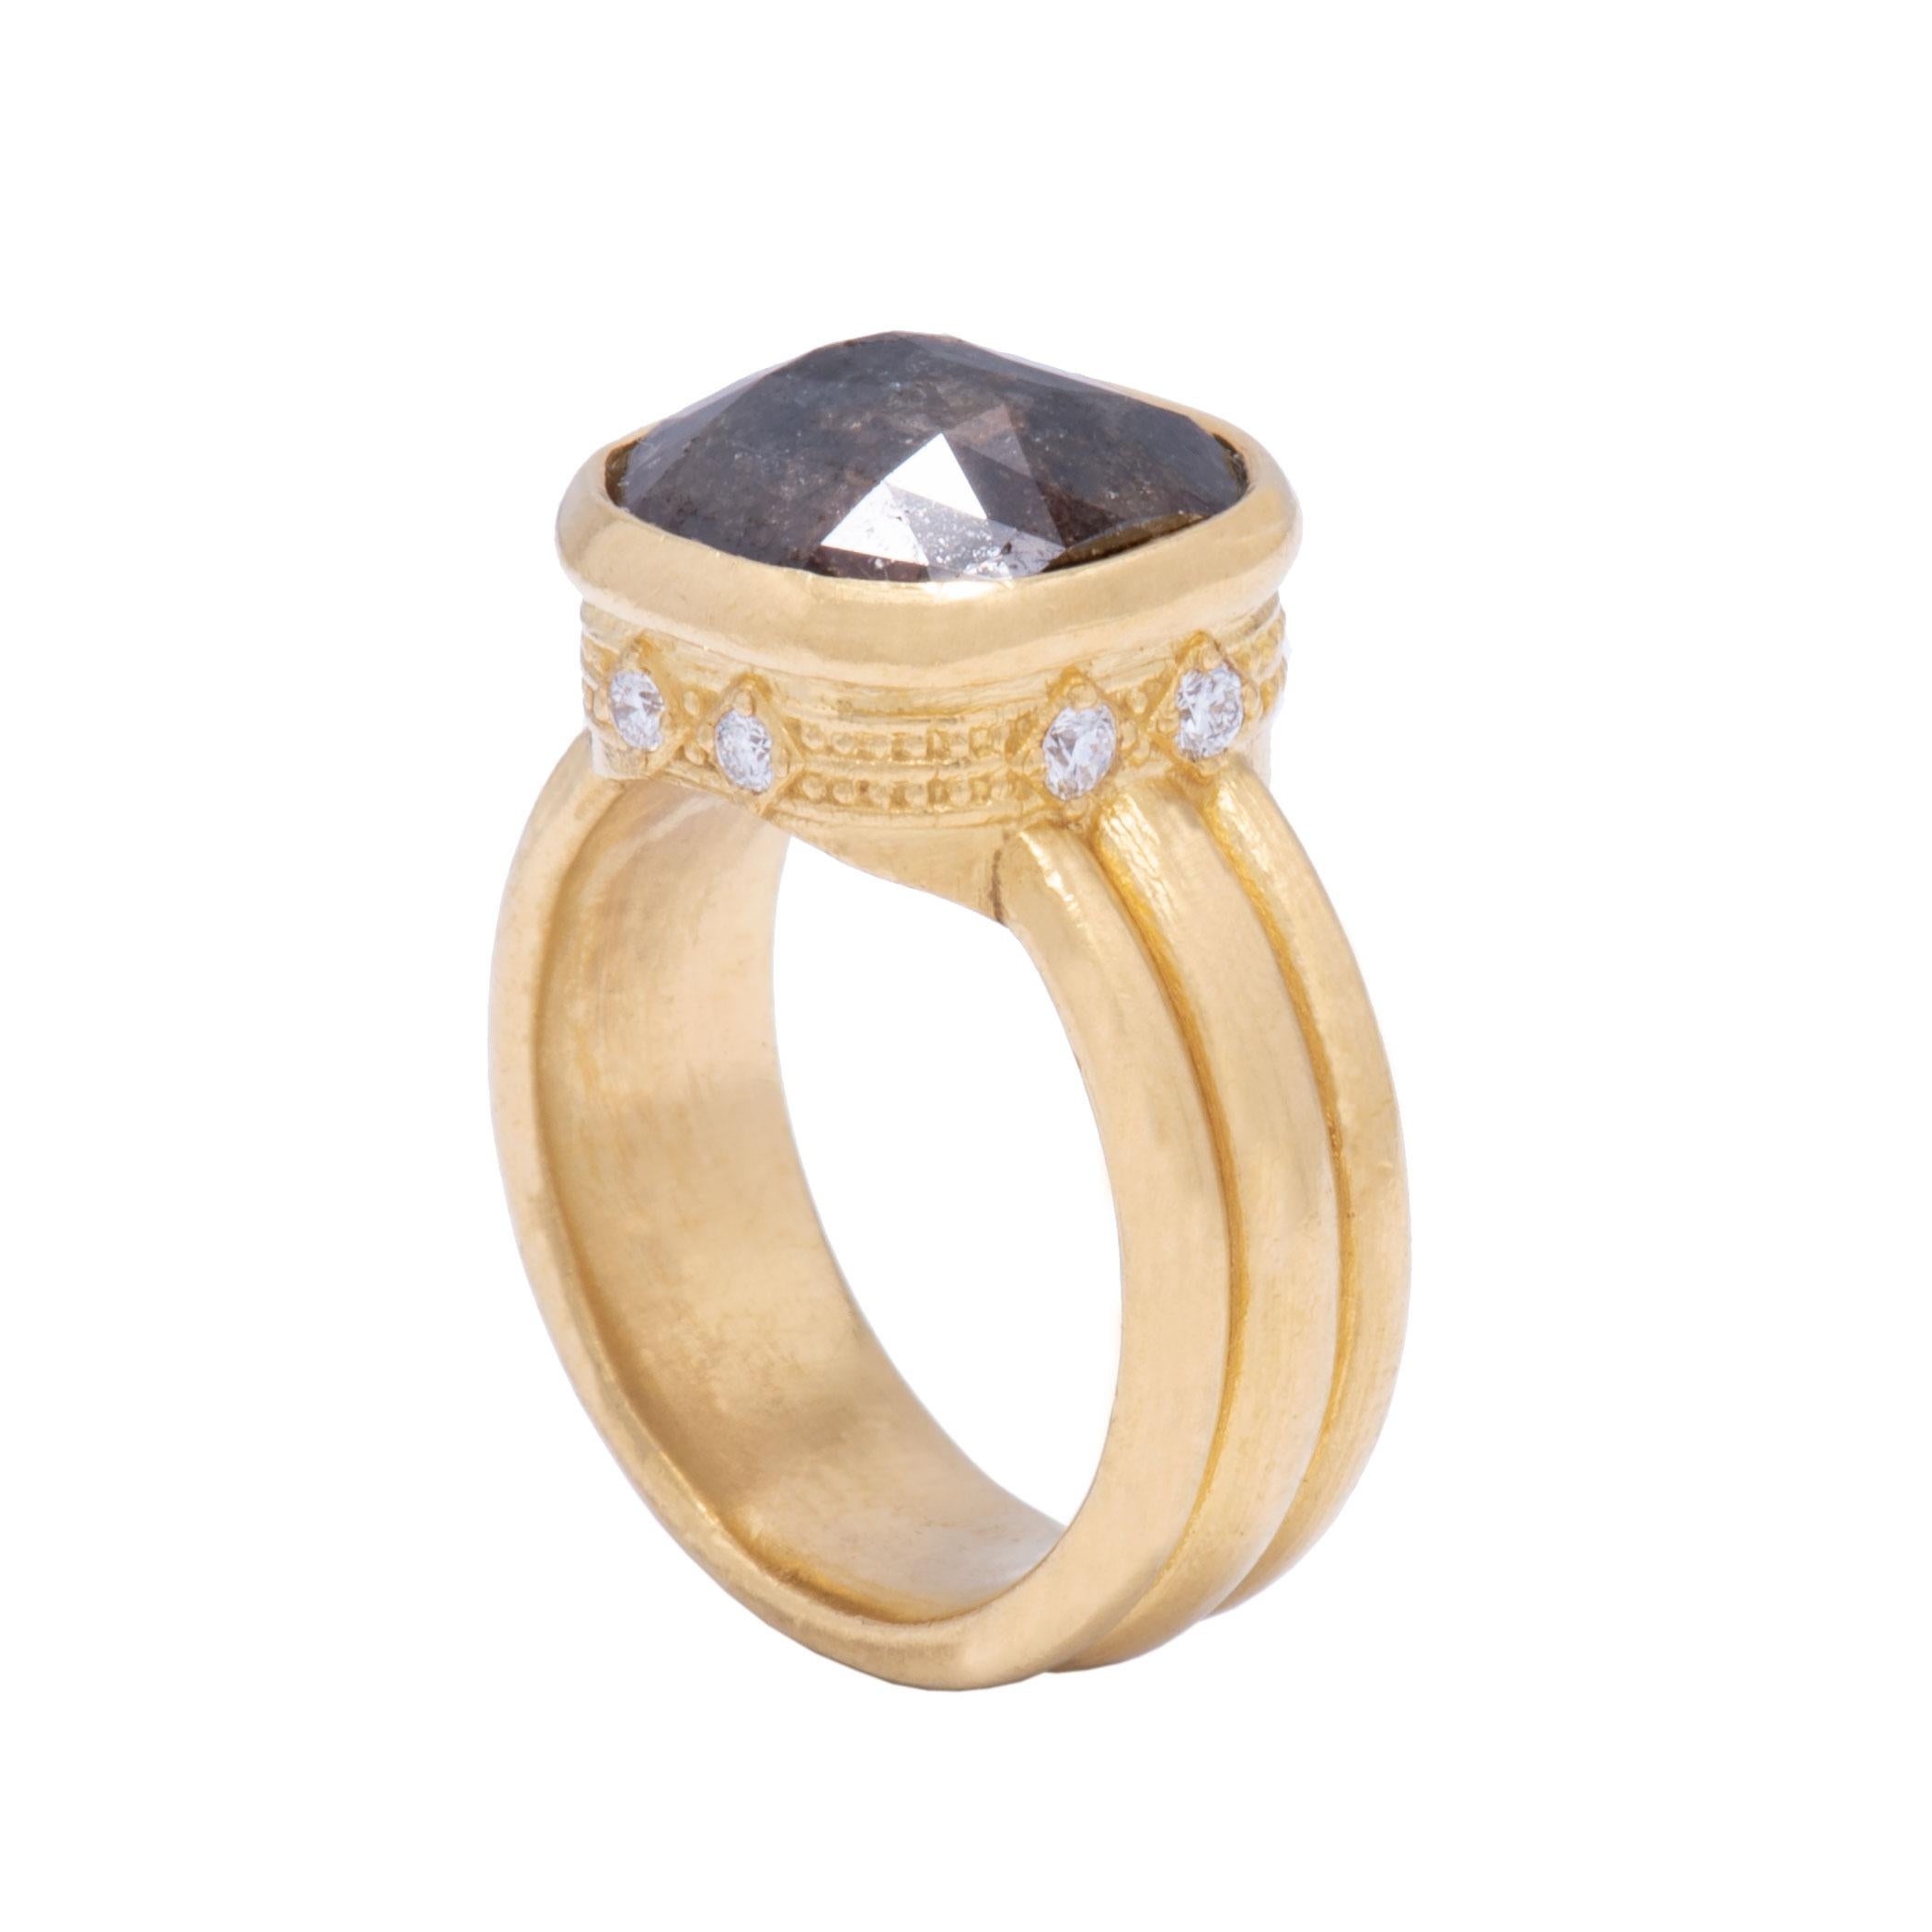 A luxurious, deep chocolate, rose cut brown diamond is set in 22k gold for rich, classic look. A 5.32ct rose cut brown diamond rises .45